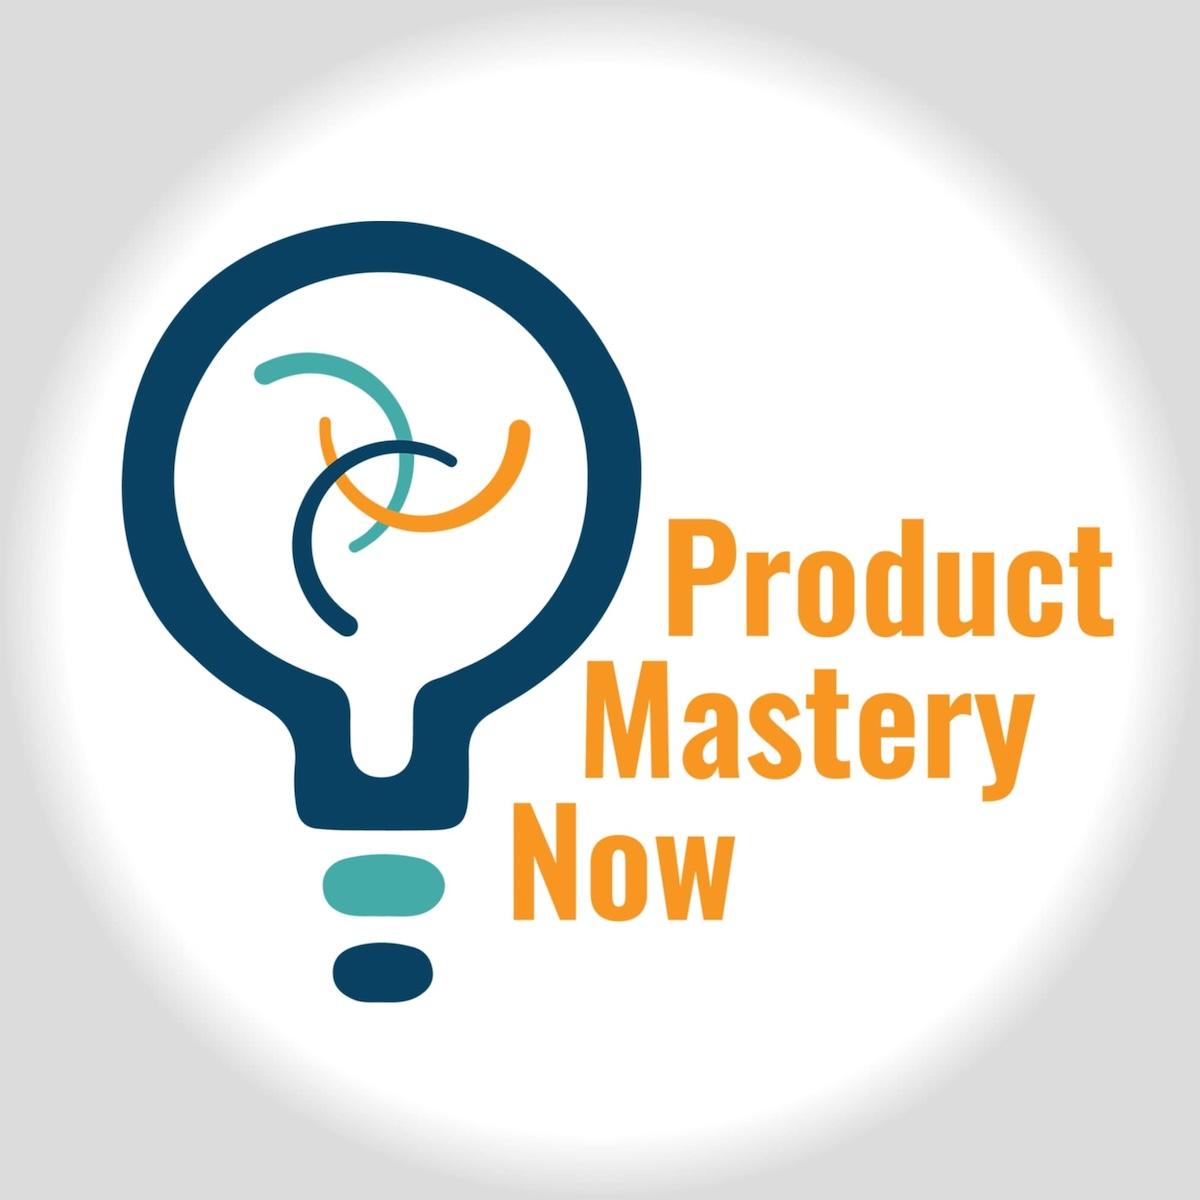 Product Mastery Now logo